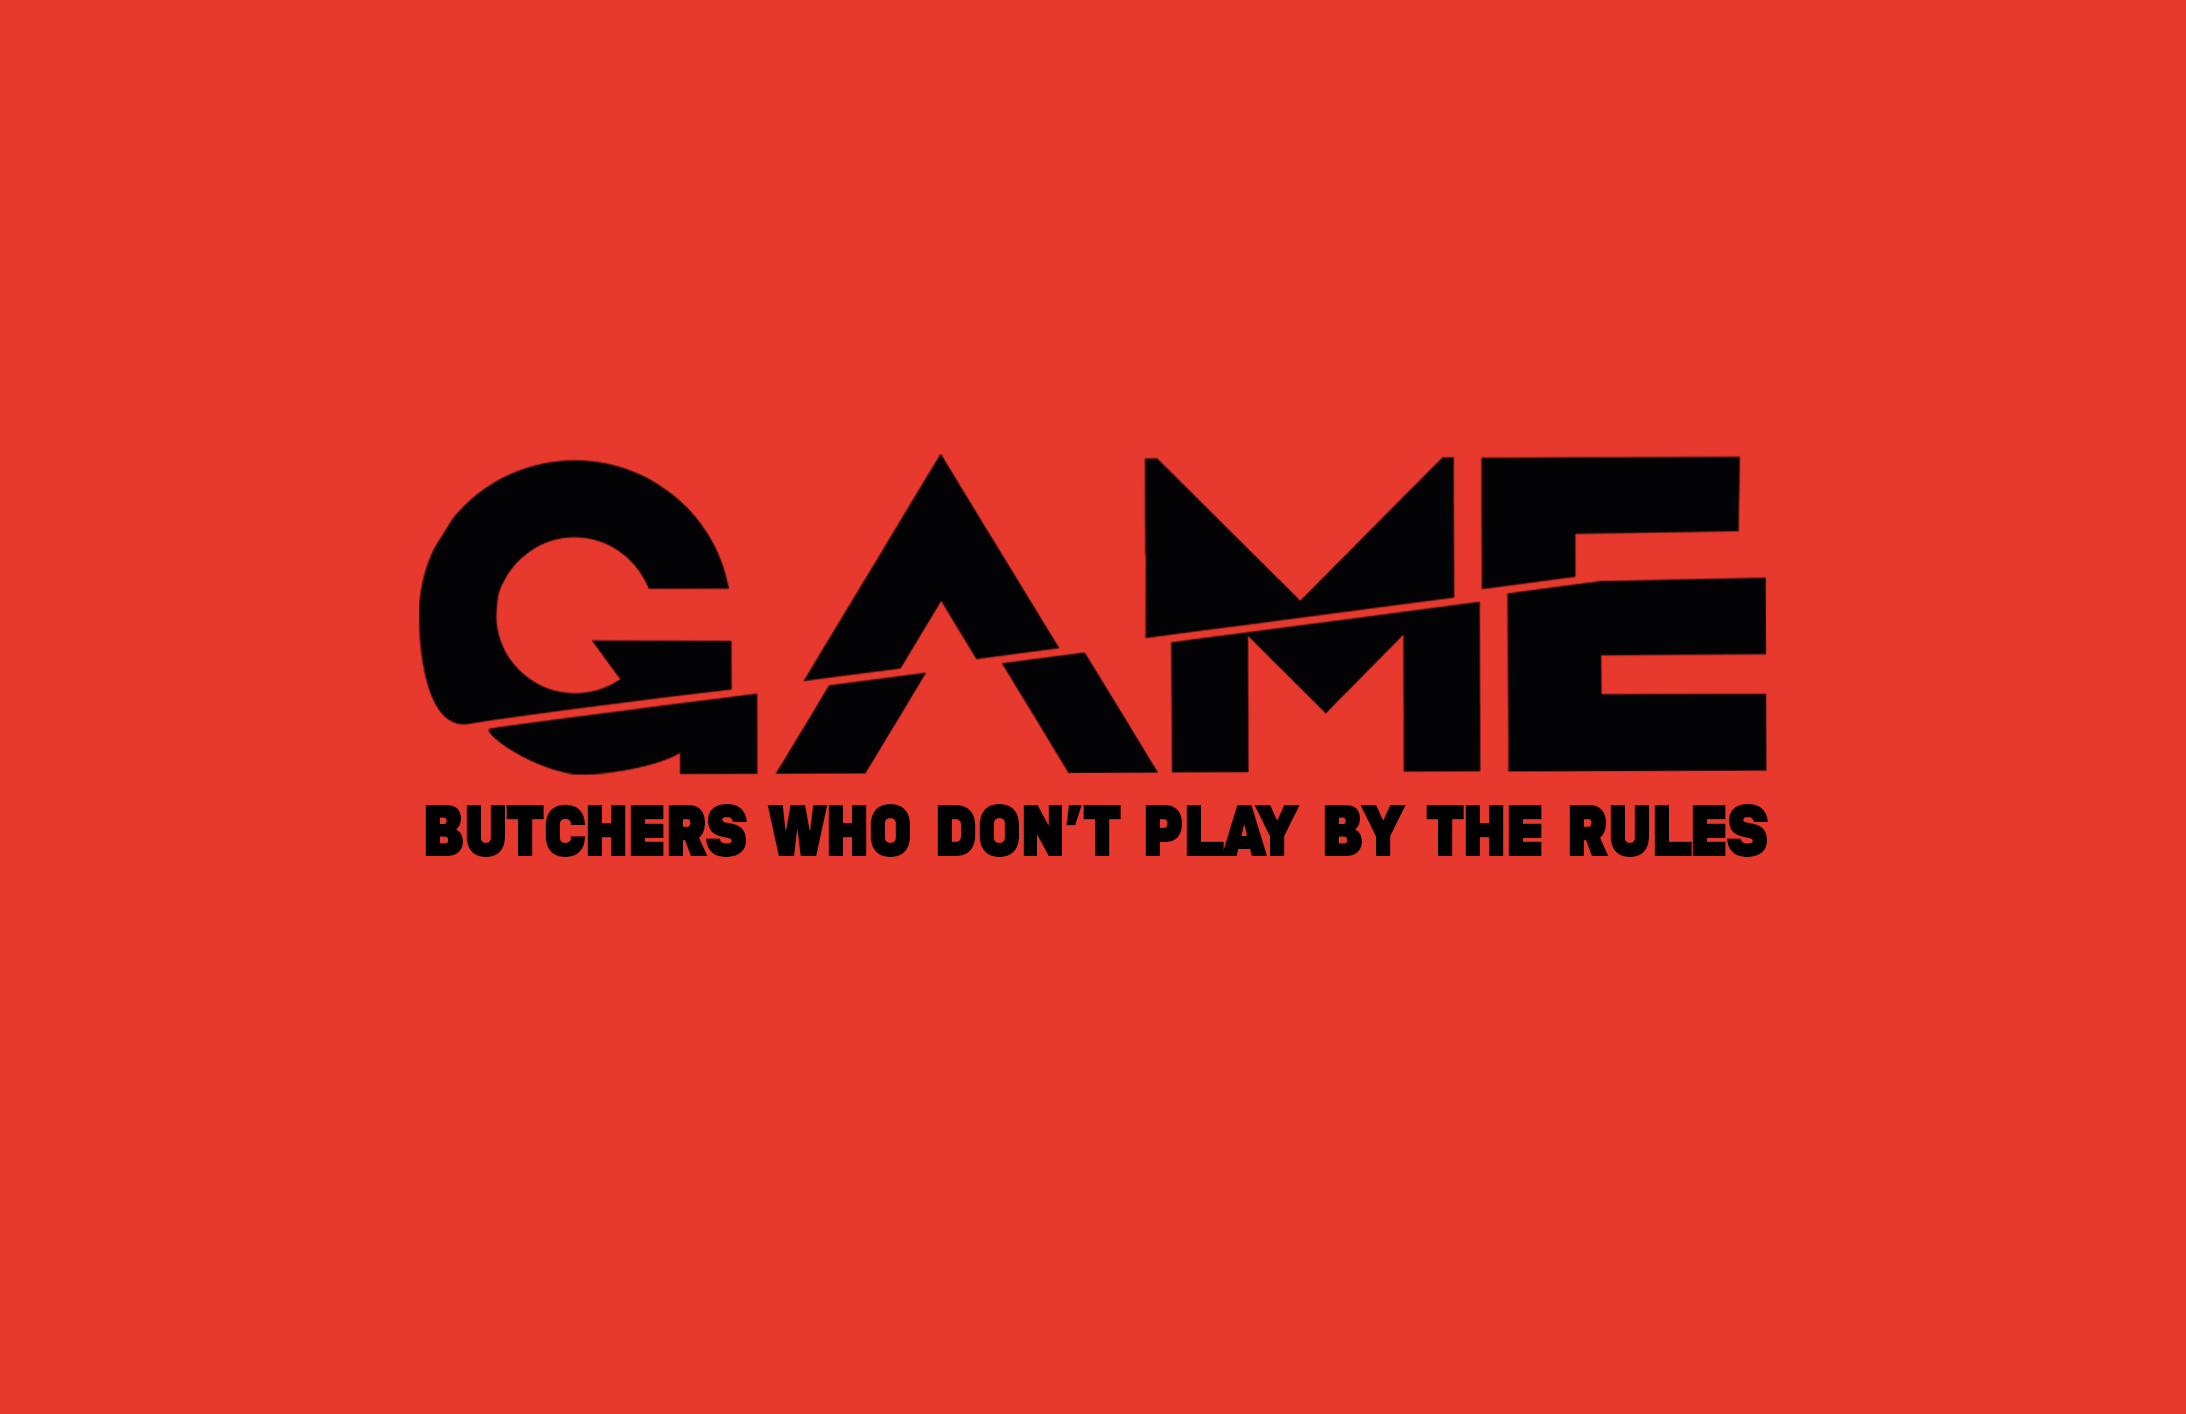 Game Butchers Identity video explaining concept by Estelle Naderi. Thumbnail is red background with black type saying 'Game' large and smaller text saying 'Butchers who don't play by the rules'